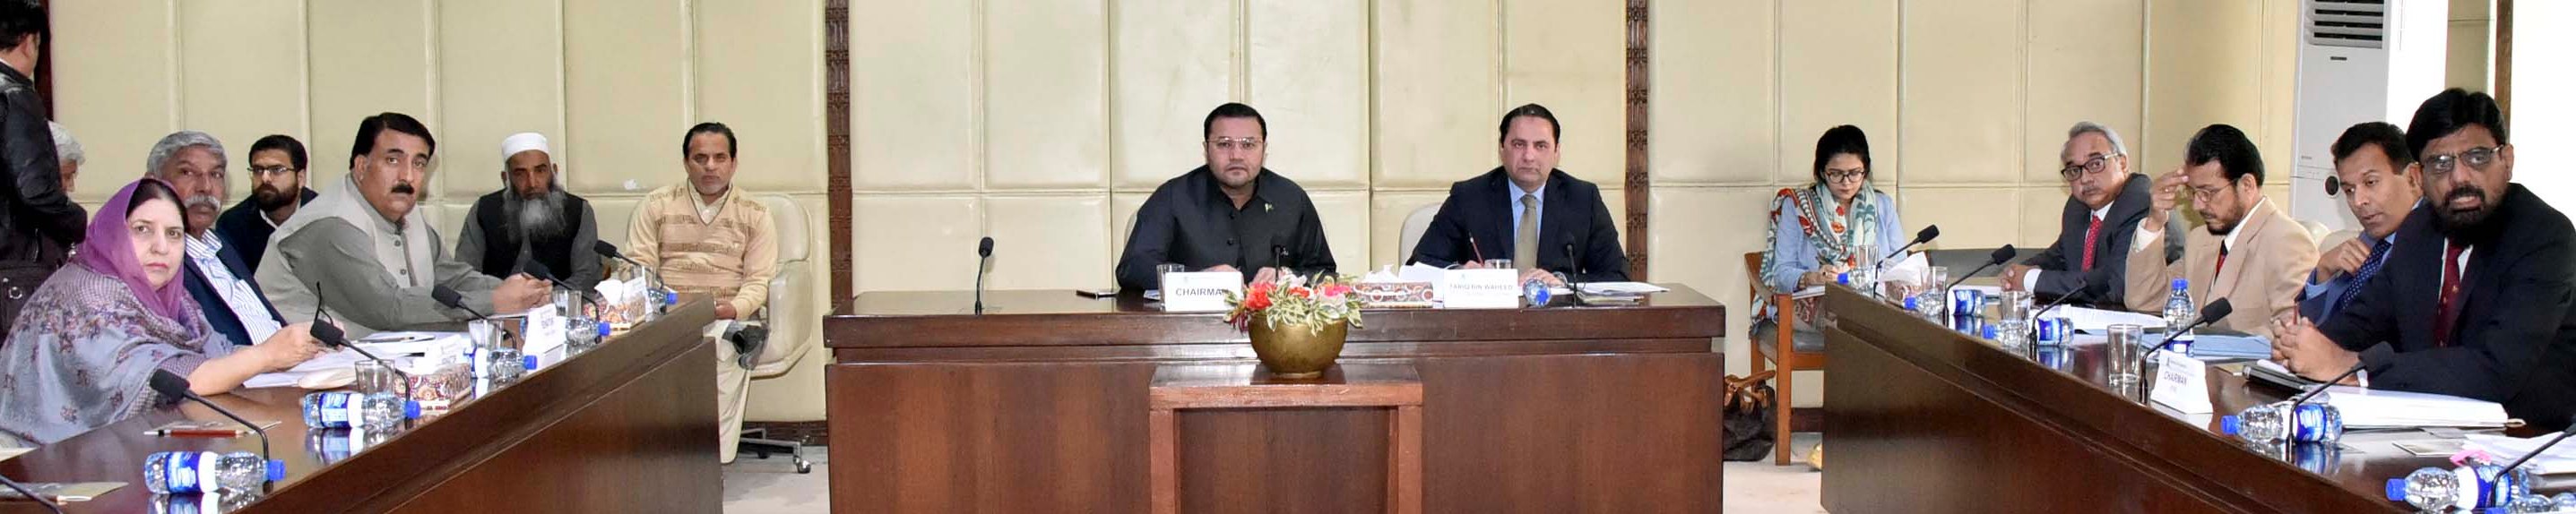 SENATOR AHMED KHAN, CHAIRMAN SENATE STANDING COMMITTEE ON INDUSTRIES AND PRODUCTION PRESIDING OVER A MEETING OF THE COMMITTEE AT PARLIAMENT HOUSE ISLAMABAD ON FEBRUARY 20, 2019.